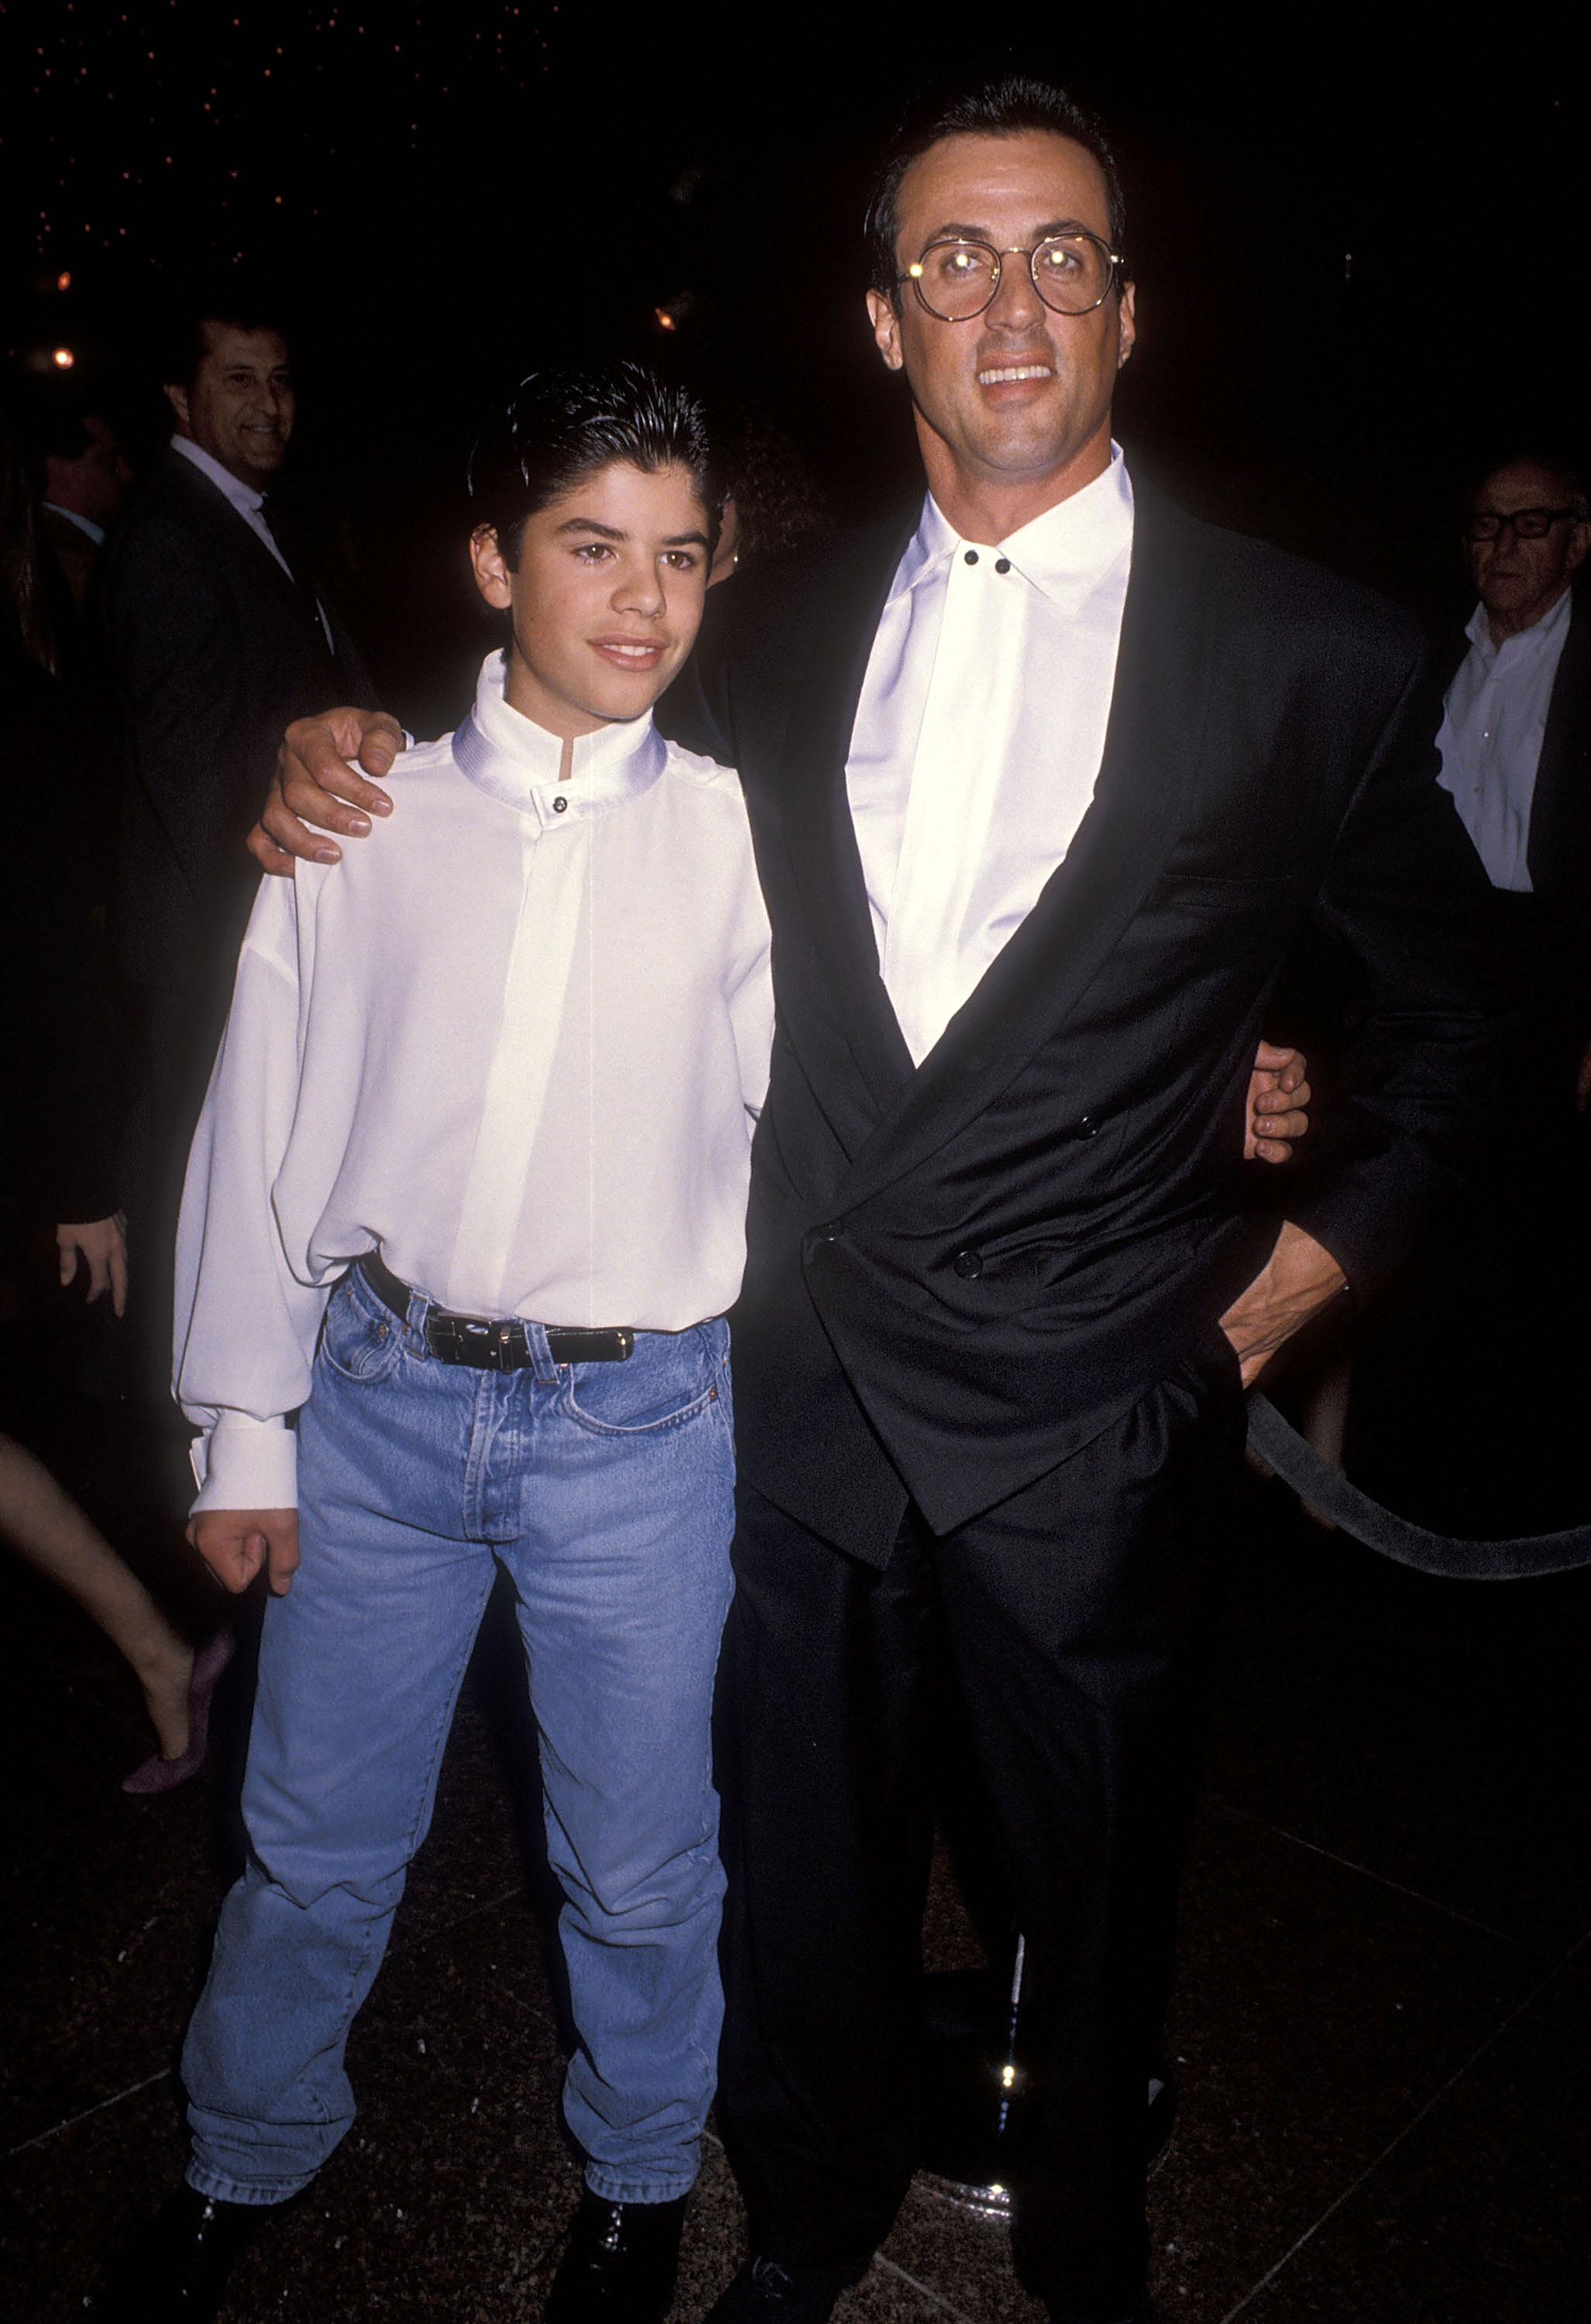 The boy and his father at the "Rocky V" premiere in West Hollywood, California, on November 13, 1990 | Source: Getty Images